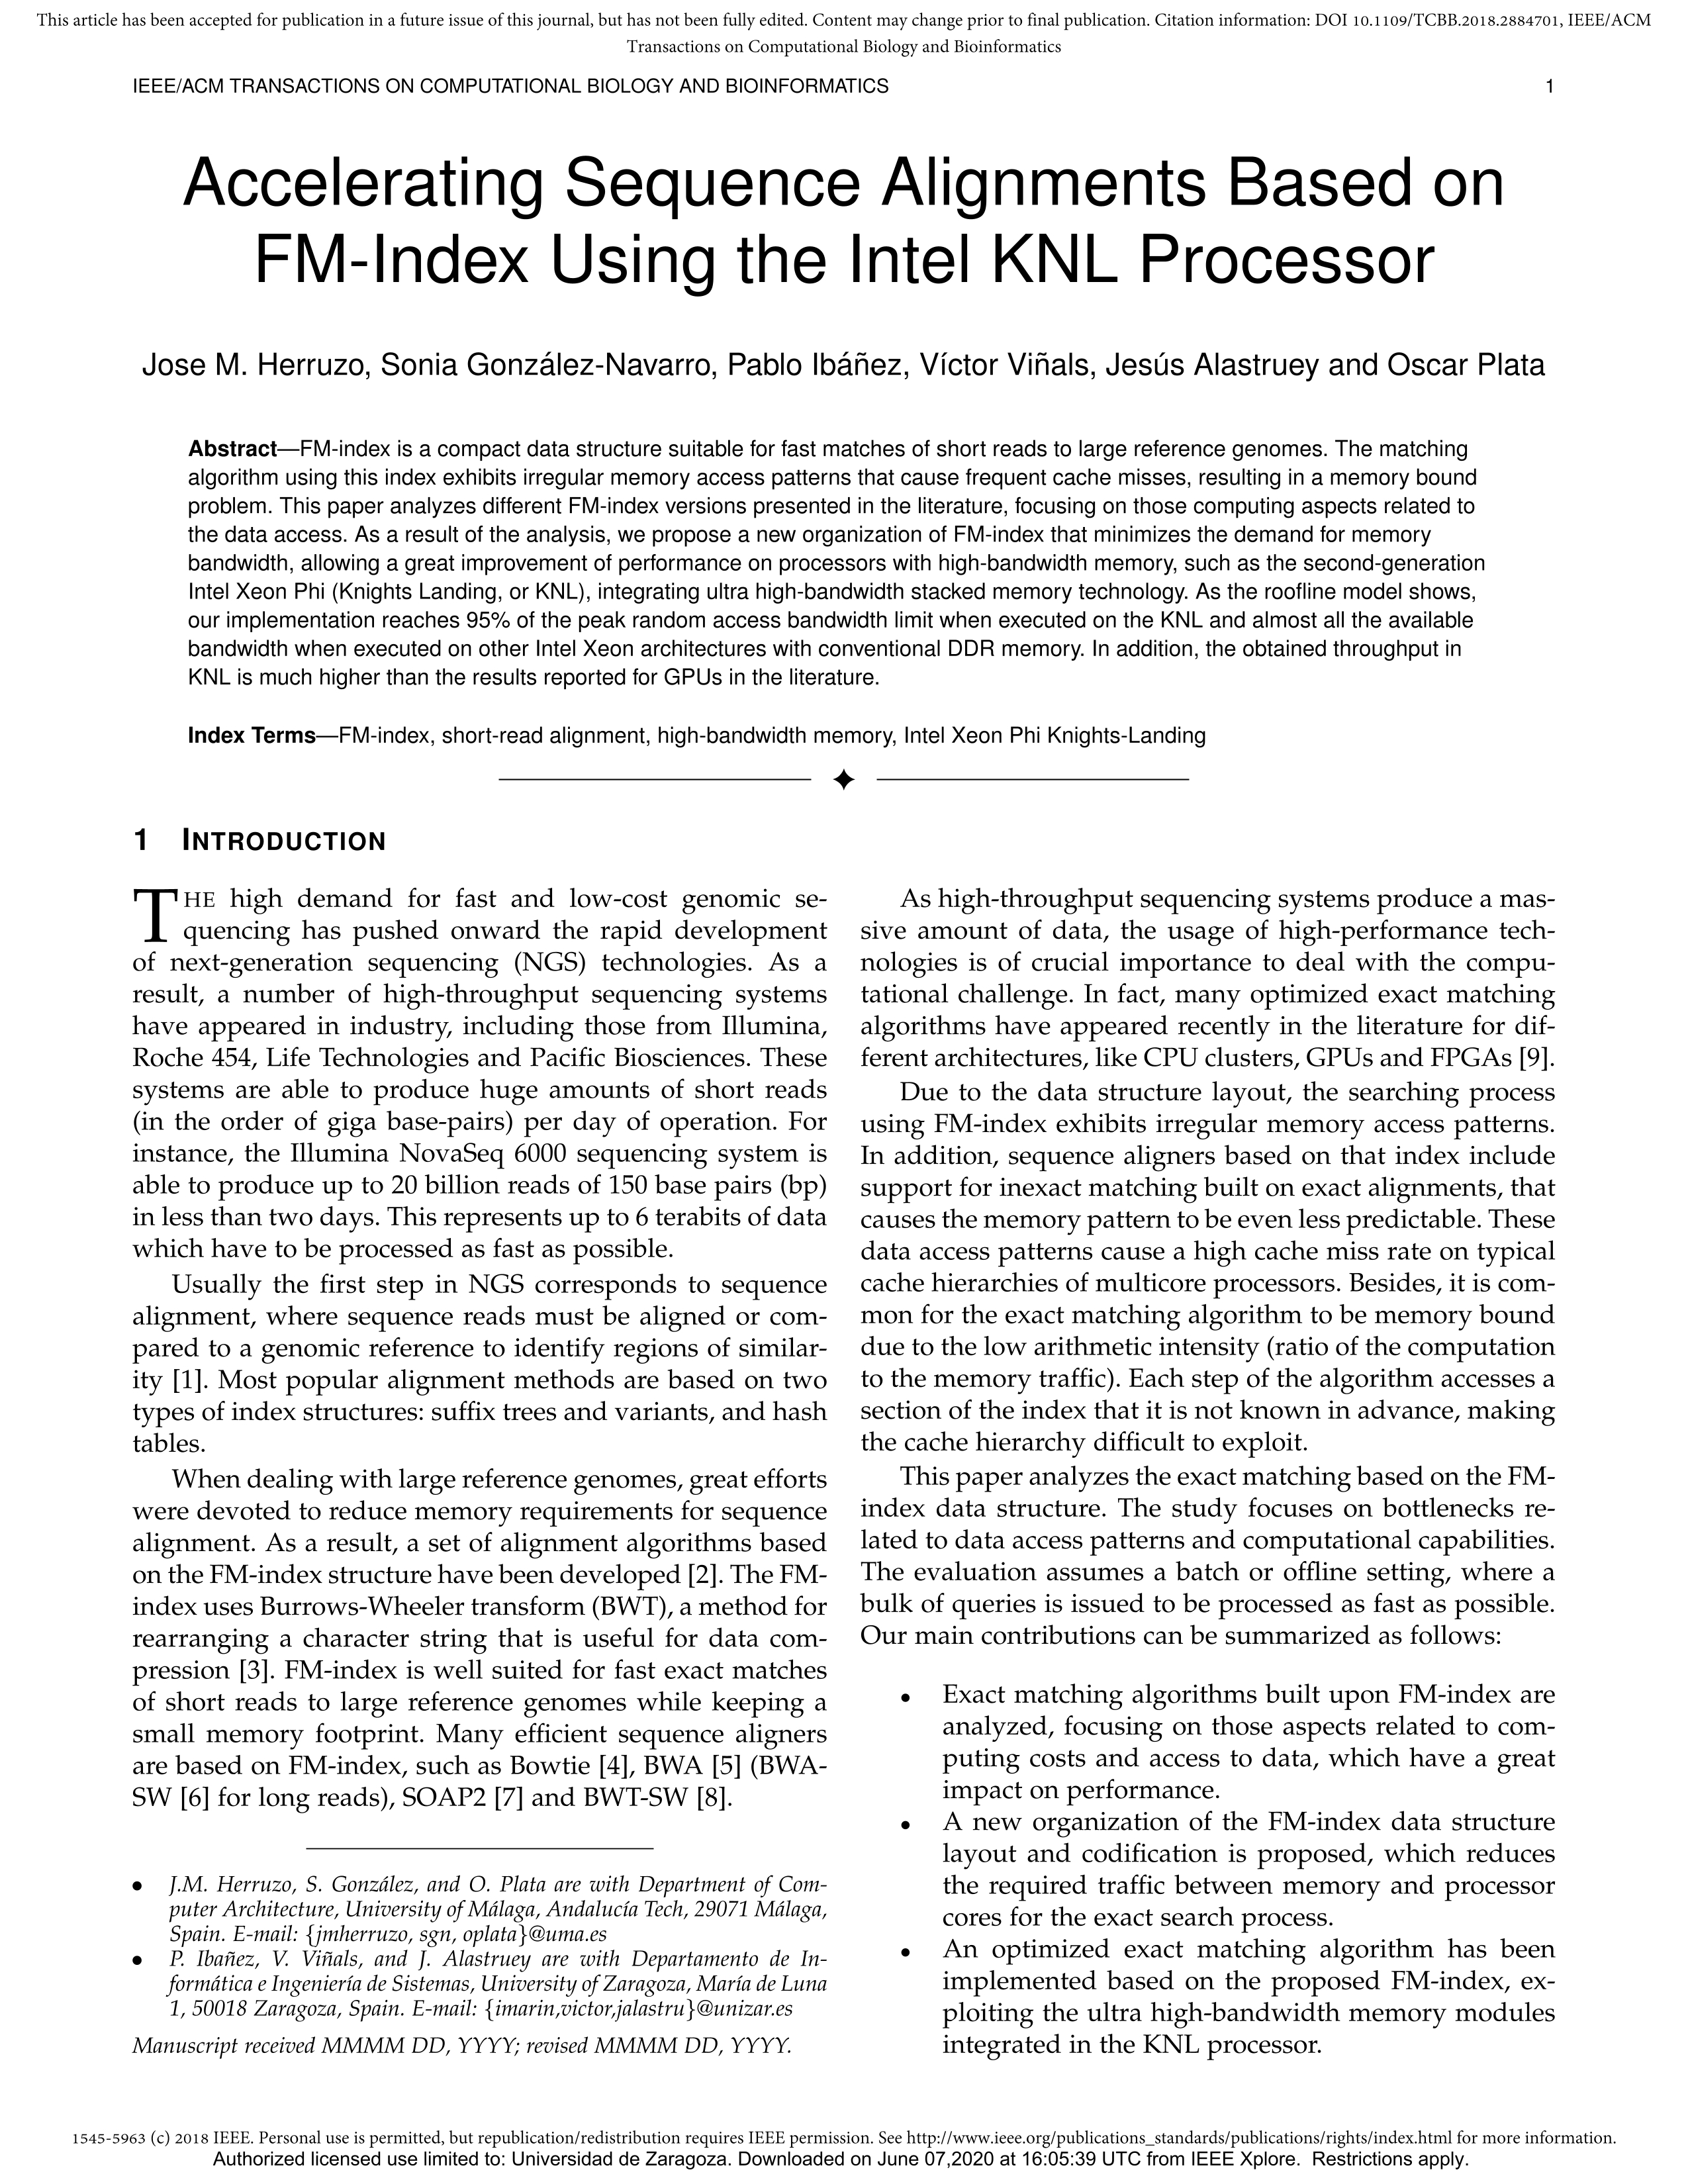 Accelerating Sequence Alignments Based on FM-Index Using the Intel KNL Processor